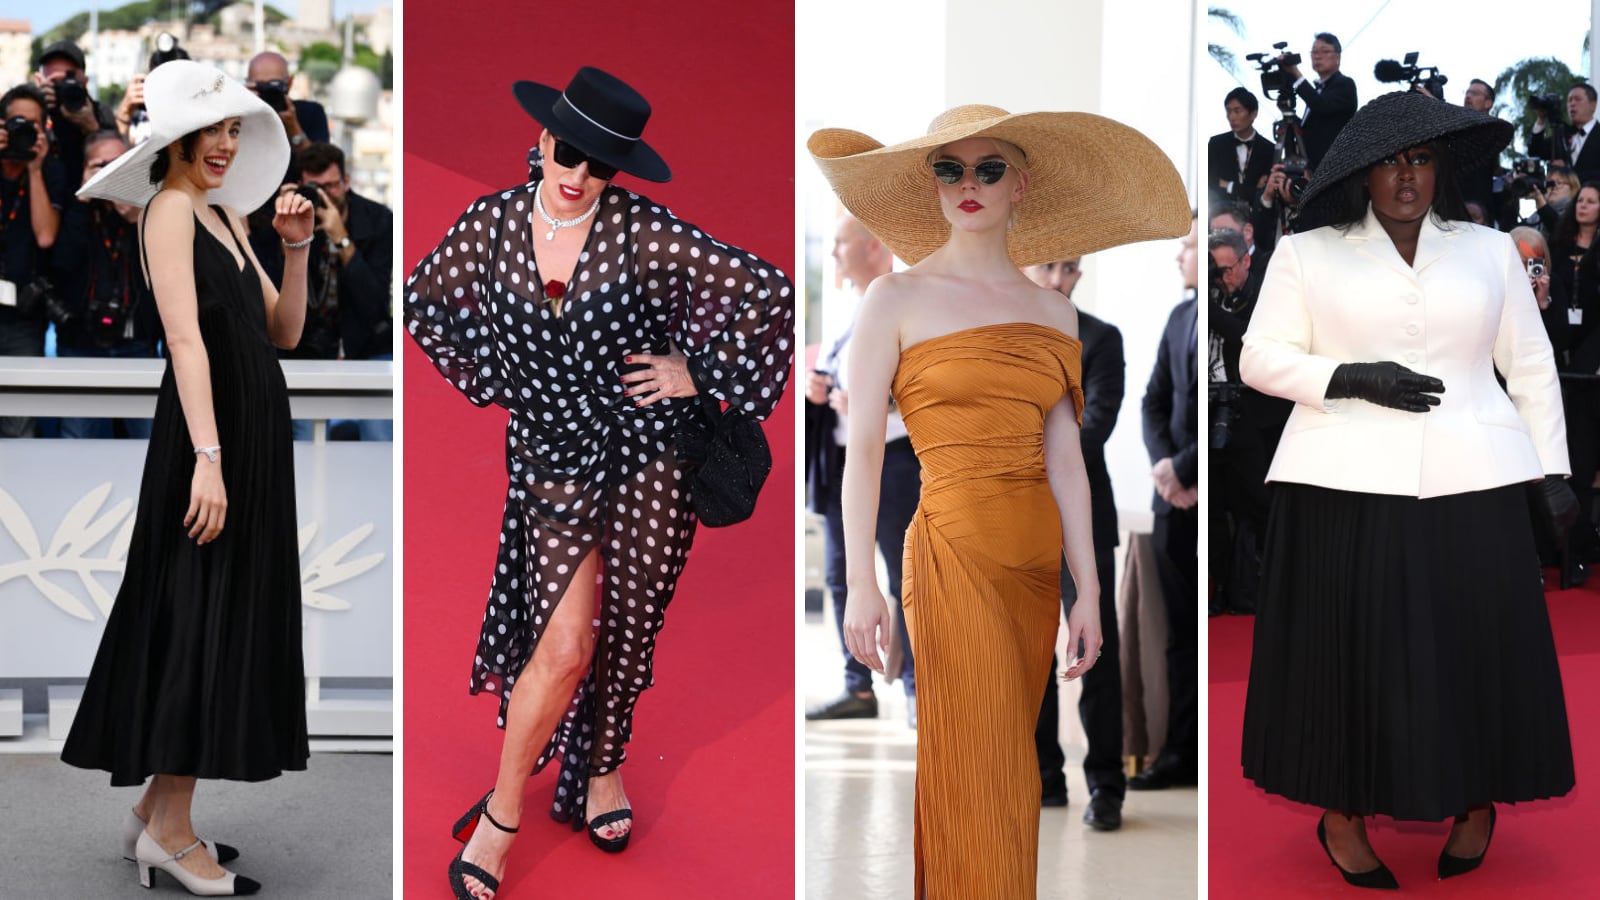 Margaret Qualley, Rossy De Palma, Anya Taylor-Joy and Yseult led the hat trend at Cannes. Photograph: Getty Images